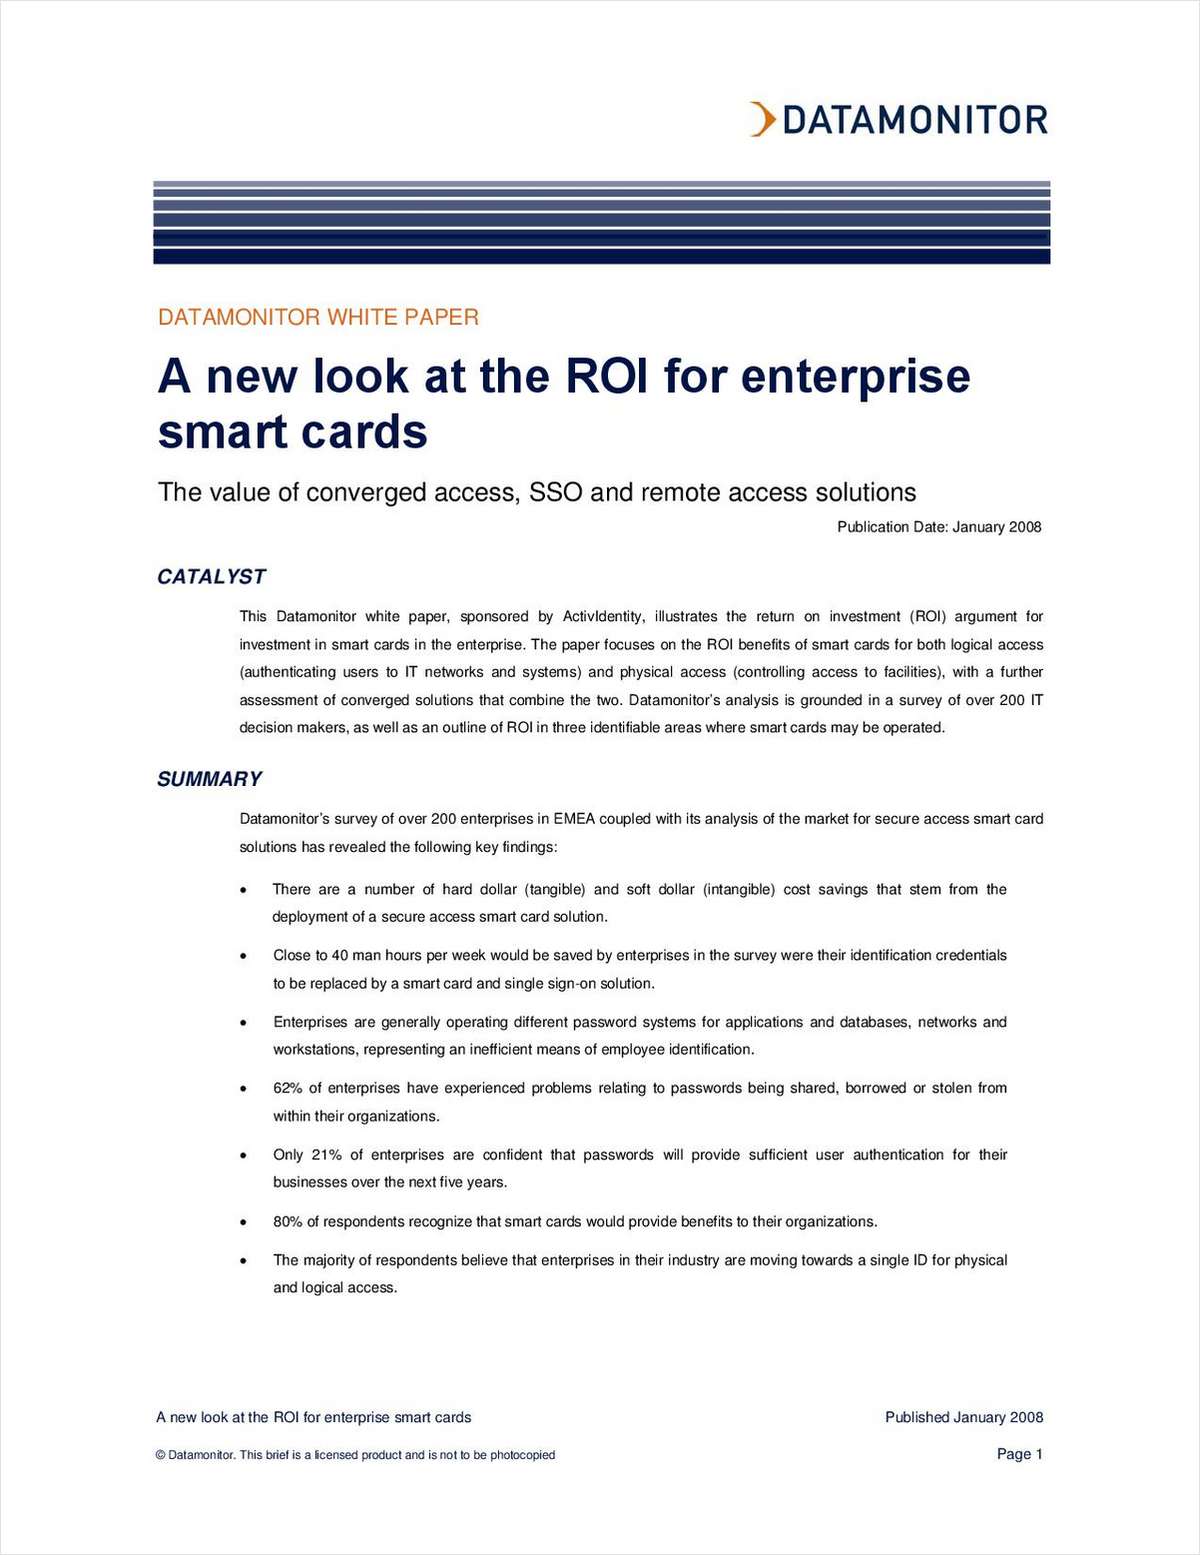 A New Look at the ROI for Enterprise Smart Cards